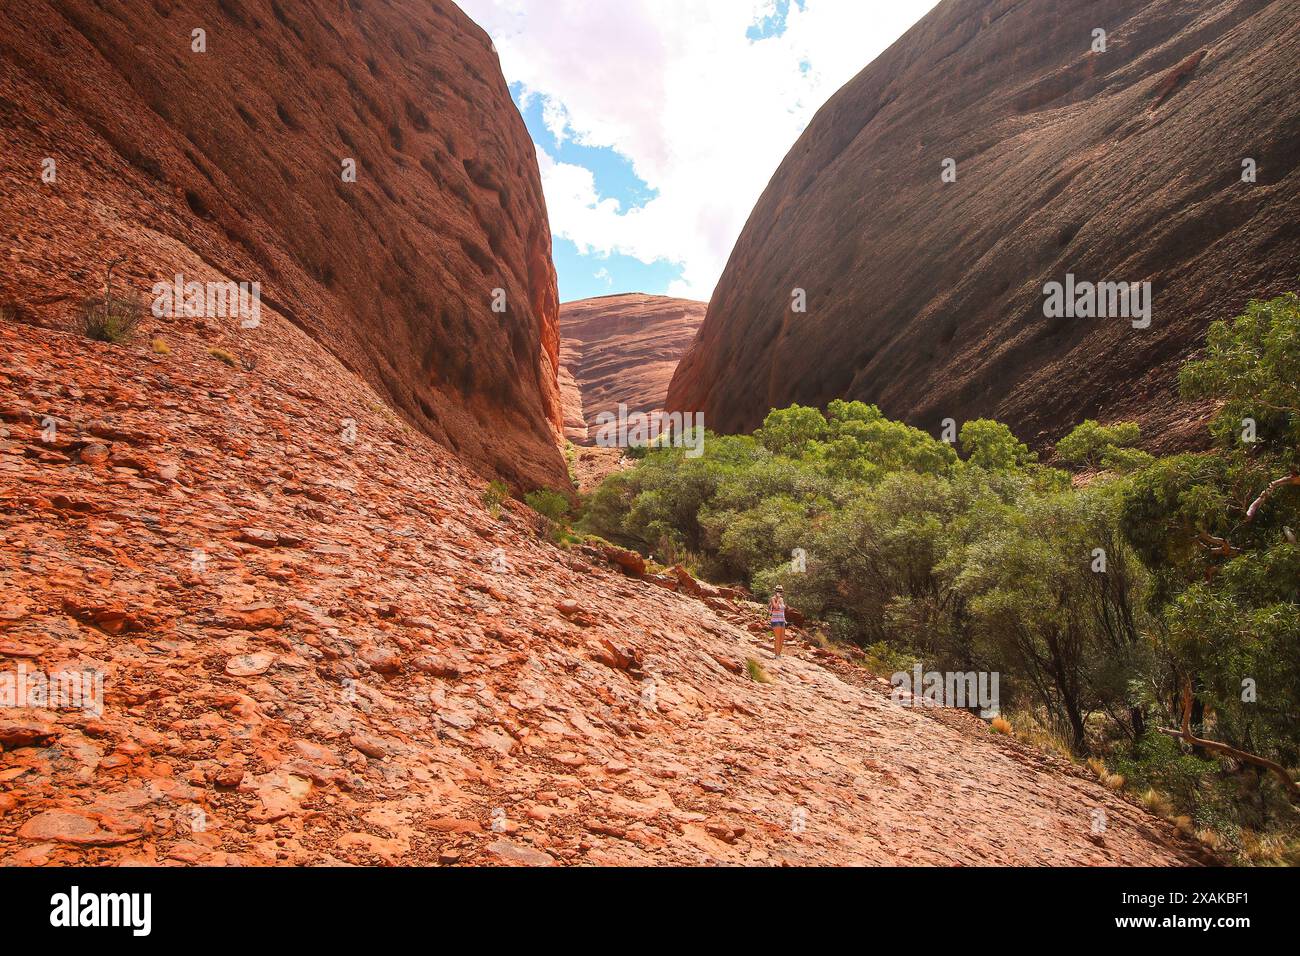 Karingana Lookout on the Valley of the Winds trail in Kata Tjuta aka the Olgas, large rock formations in Northern Territory, Central Australia - Narro Stock Photo